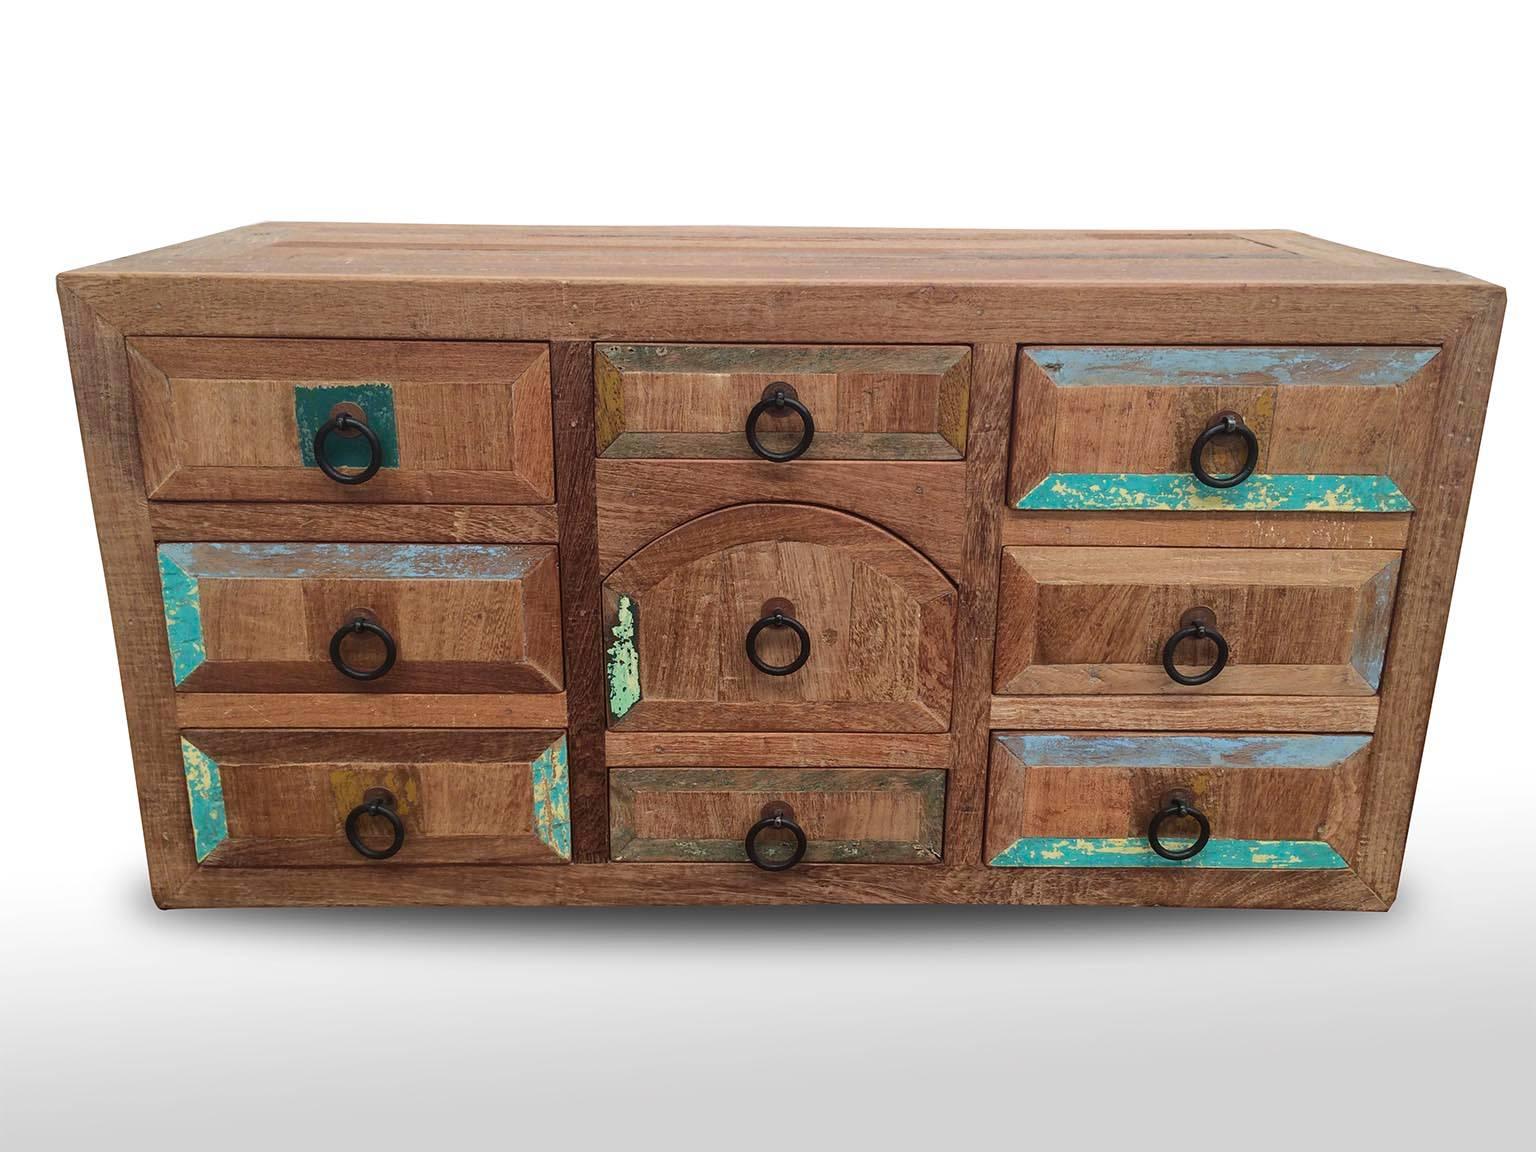 Mezquite Bargueño/chest with nine different size drawers, natural waxed honey finish with original colors (green, blue white turquoise) from antique reclaimed doors. Hand-forged iron hardware built and designed by Esteban Chapital in Mexico.
This